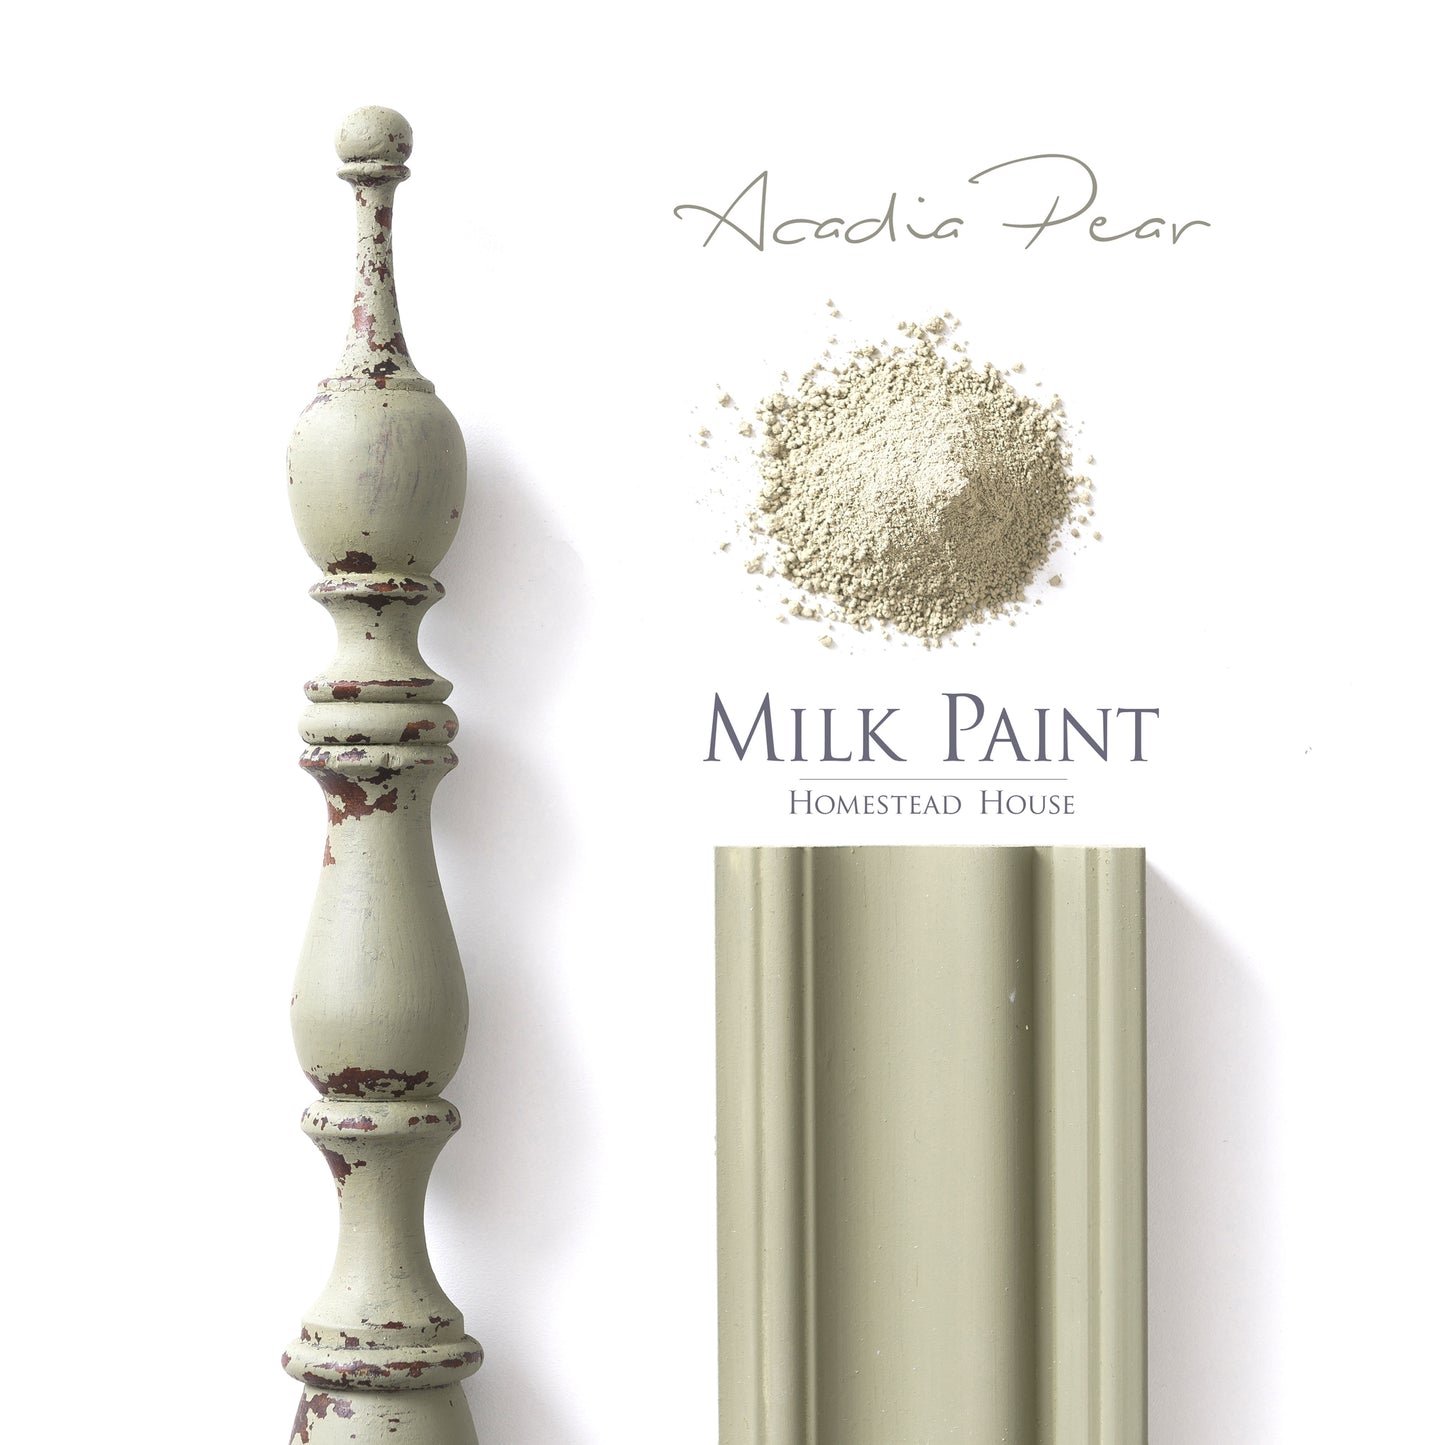 Milk Paint from Homestead House in Acadia Pear, a A warm soft sage muted green with a hint of gray.  |  homesteadhouse.ca